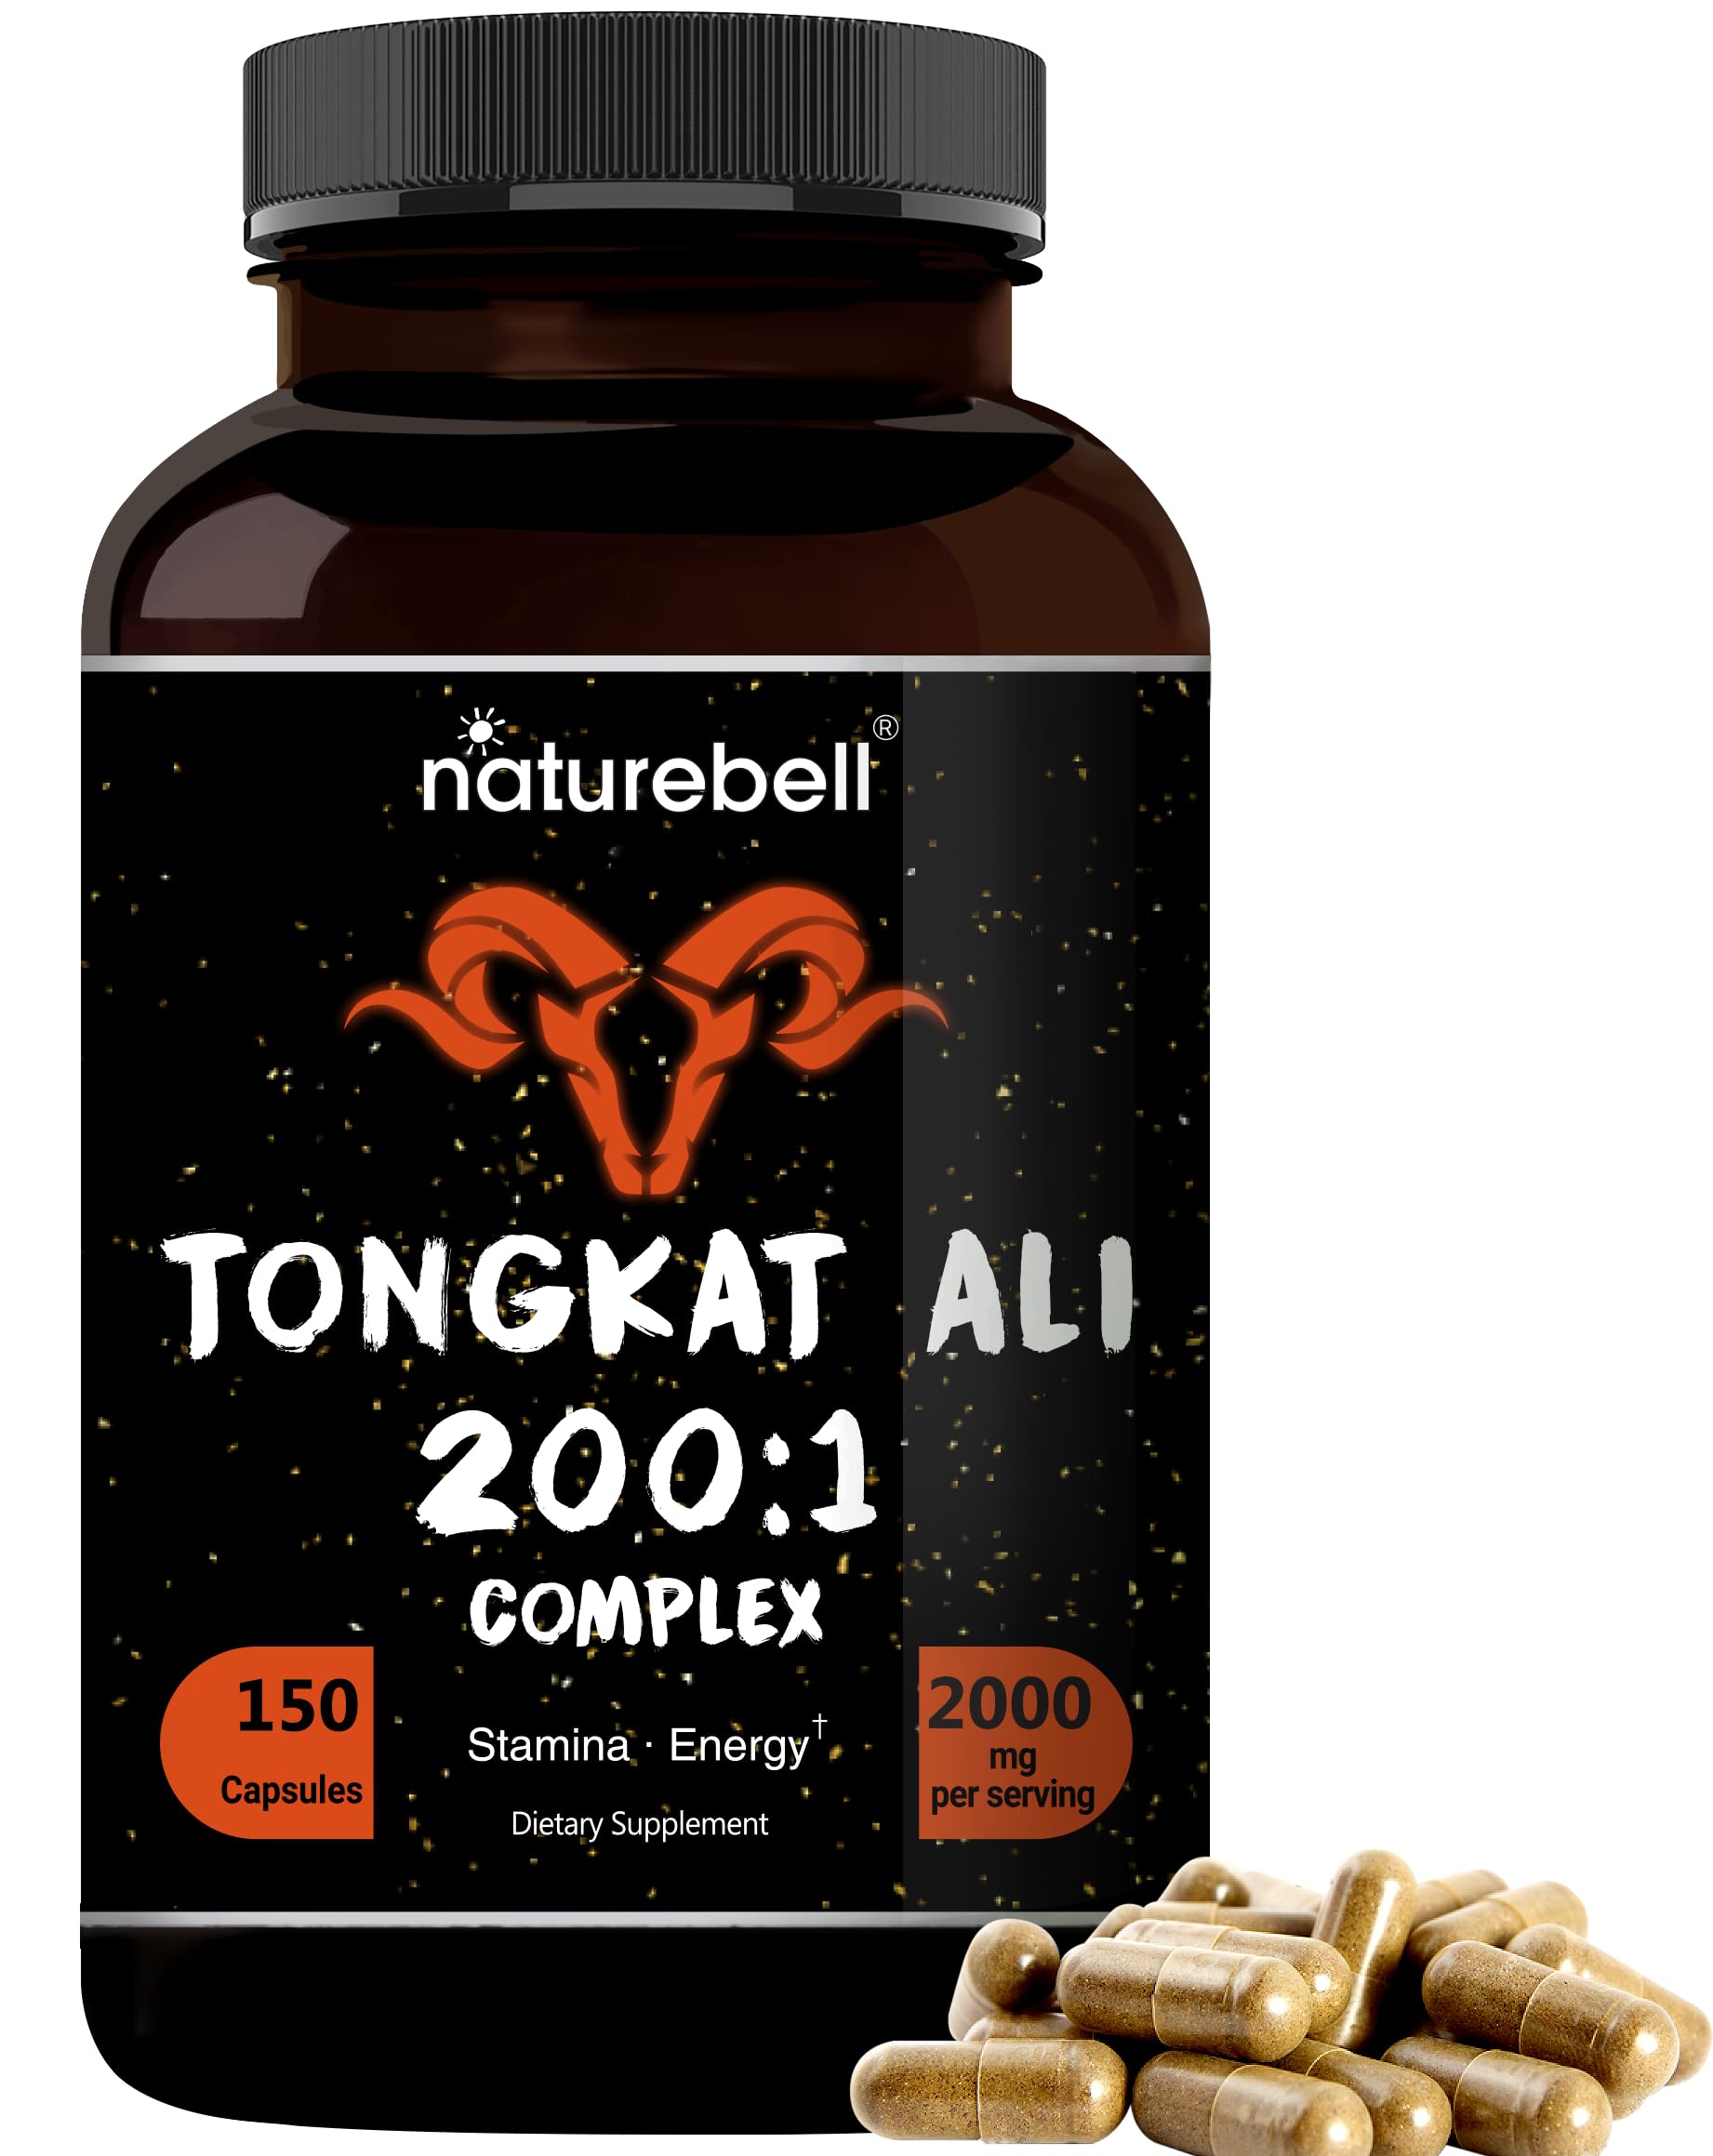 NatureBell Tongkat Ali 200:1 (Longjack) Extract for Men, 2000mg Per Serving, 150 Capsules, Indonesia Origin, Eurycoma Longifolia | with Panax Ginseng for Energy, Stamina, & Male Health Support